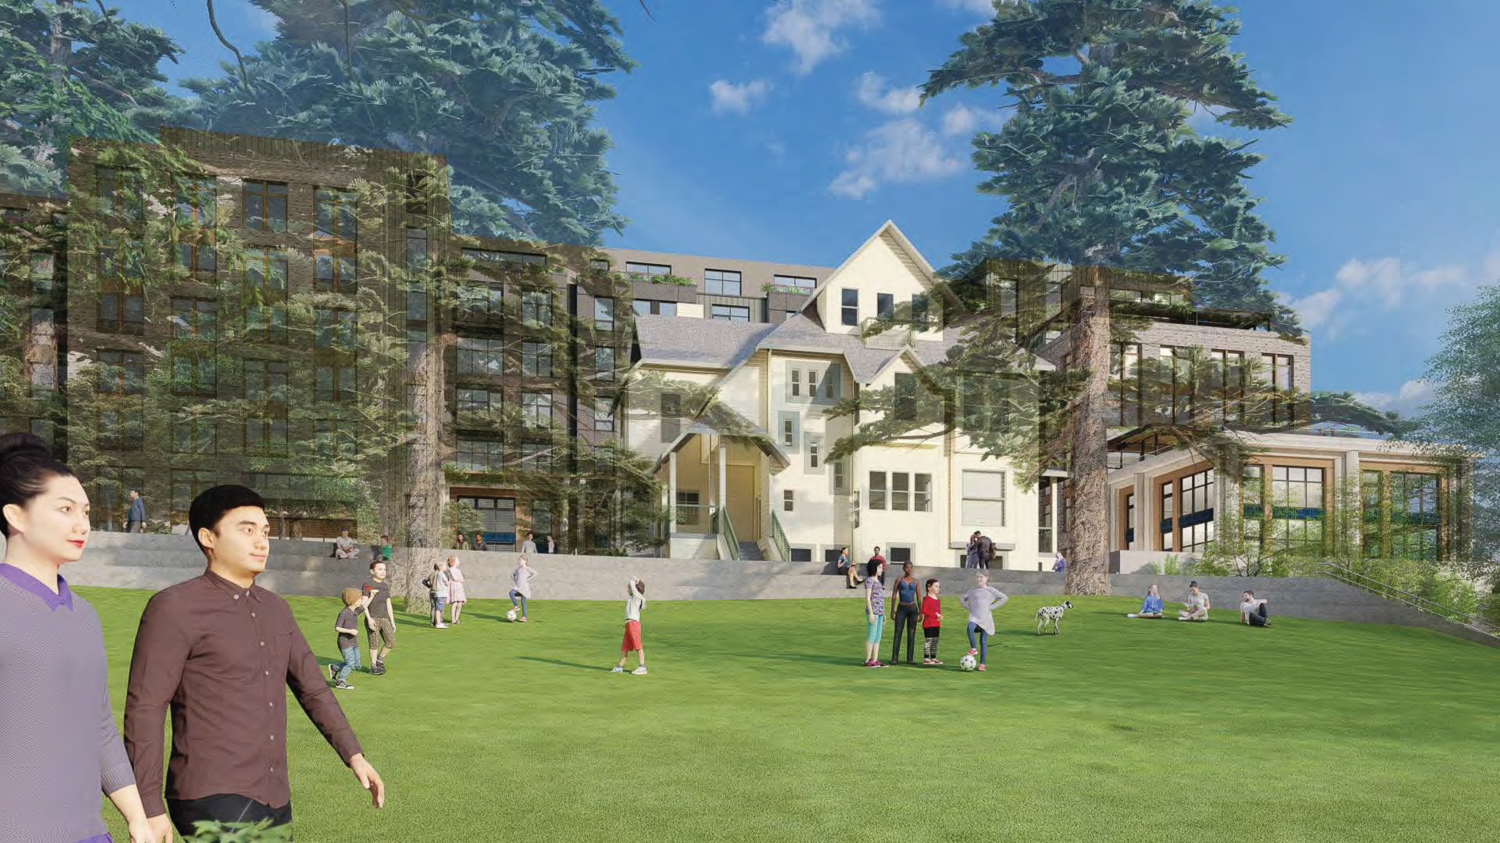 5200 Broadway Macky Lawn looking towards Macky Hall historic building, rendering by Mithun